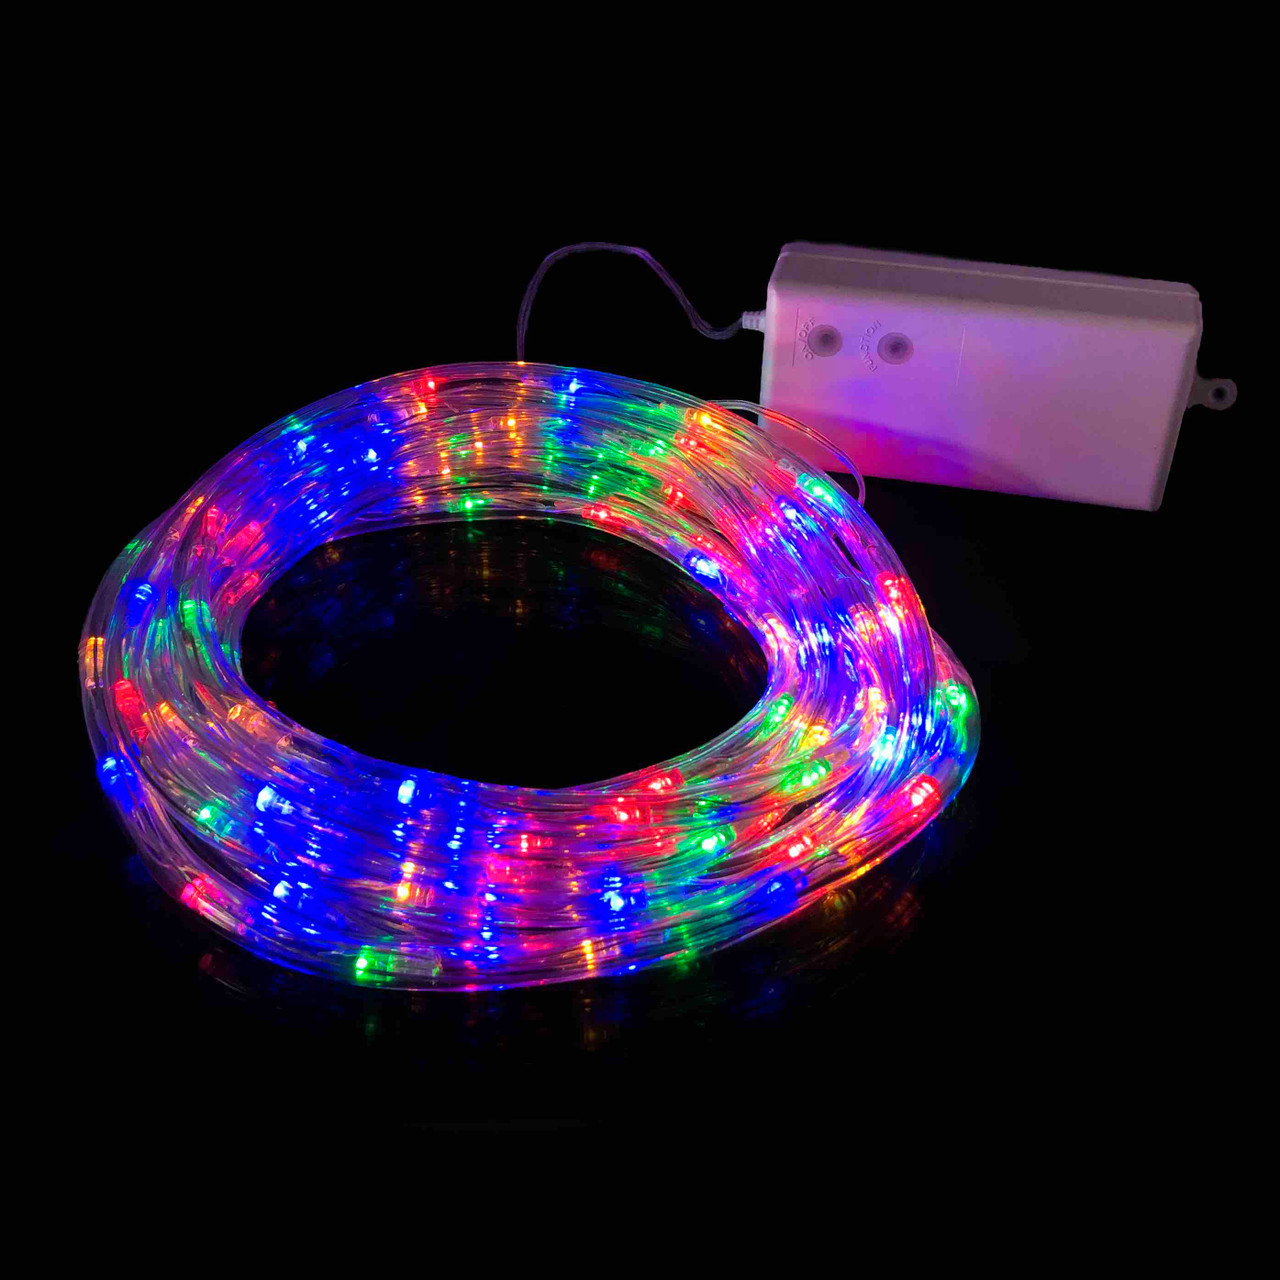 https://cdn11.bigcommerce.com/s-686nv5bi9w/images/stencil/1280x1280/products/2505/9637/battery-operated-rope-lights-multi__86509.1678381826.jpg?c=1